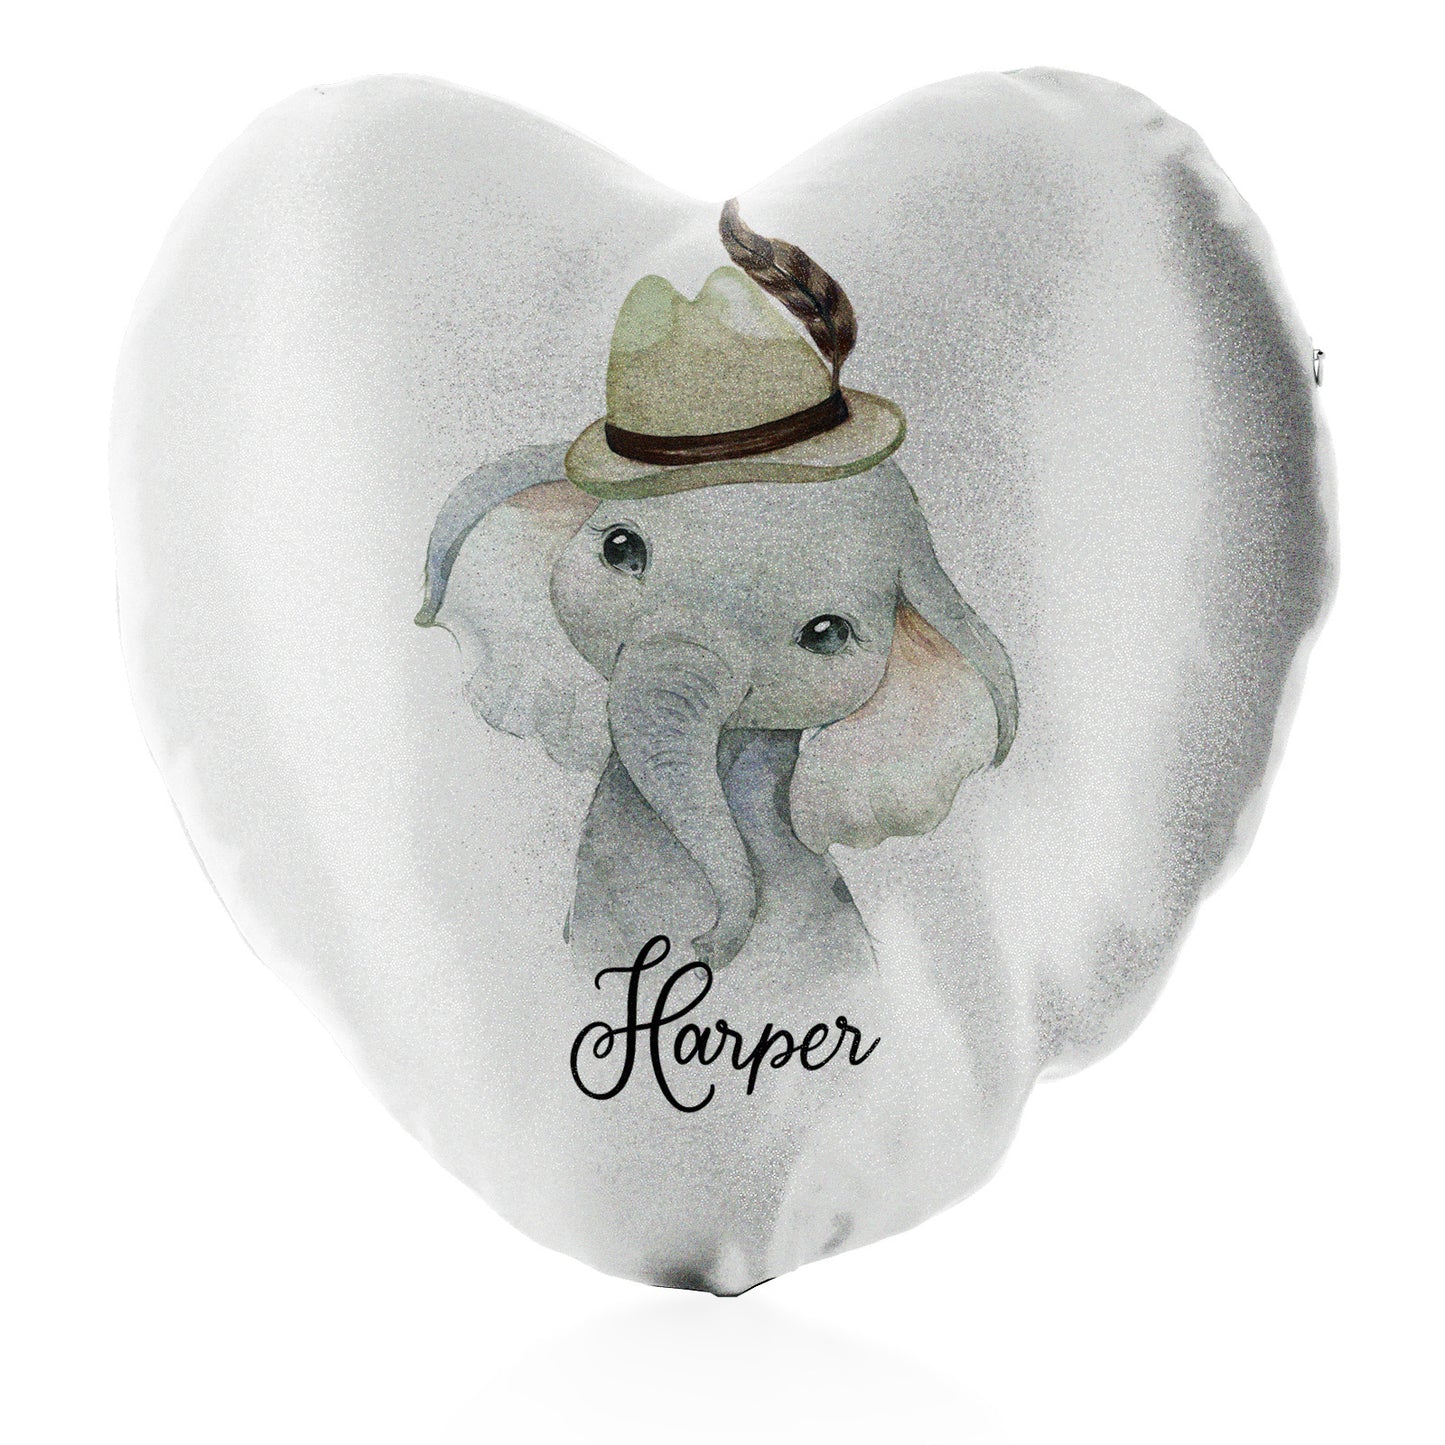 Personalised Glitter Heart Cushion with Grey Elephant Feather Hat and Cute Text